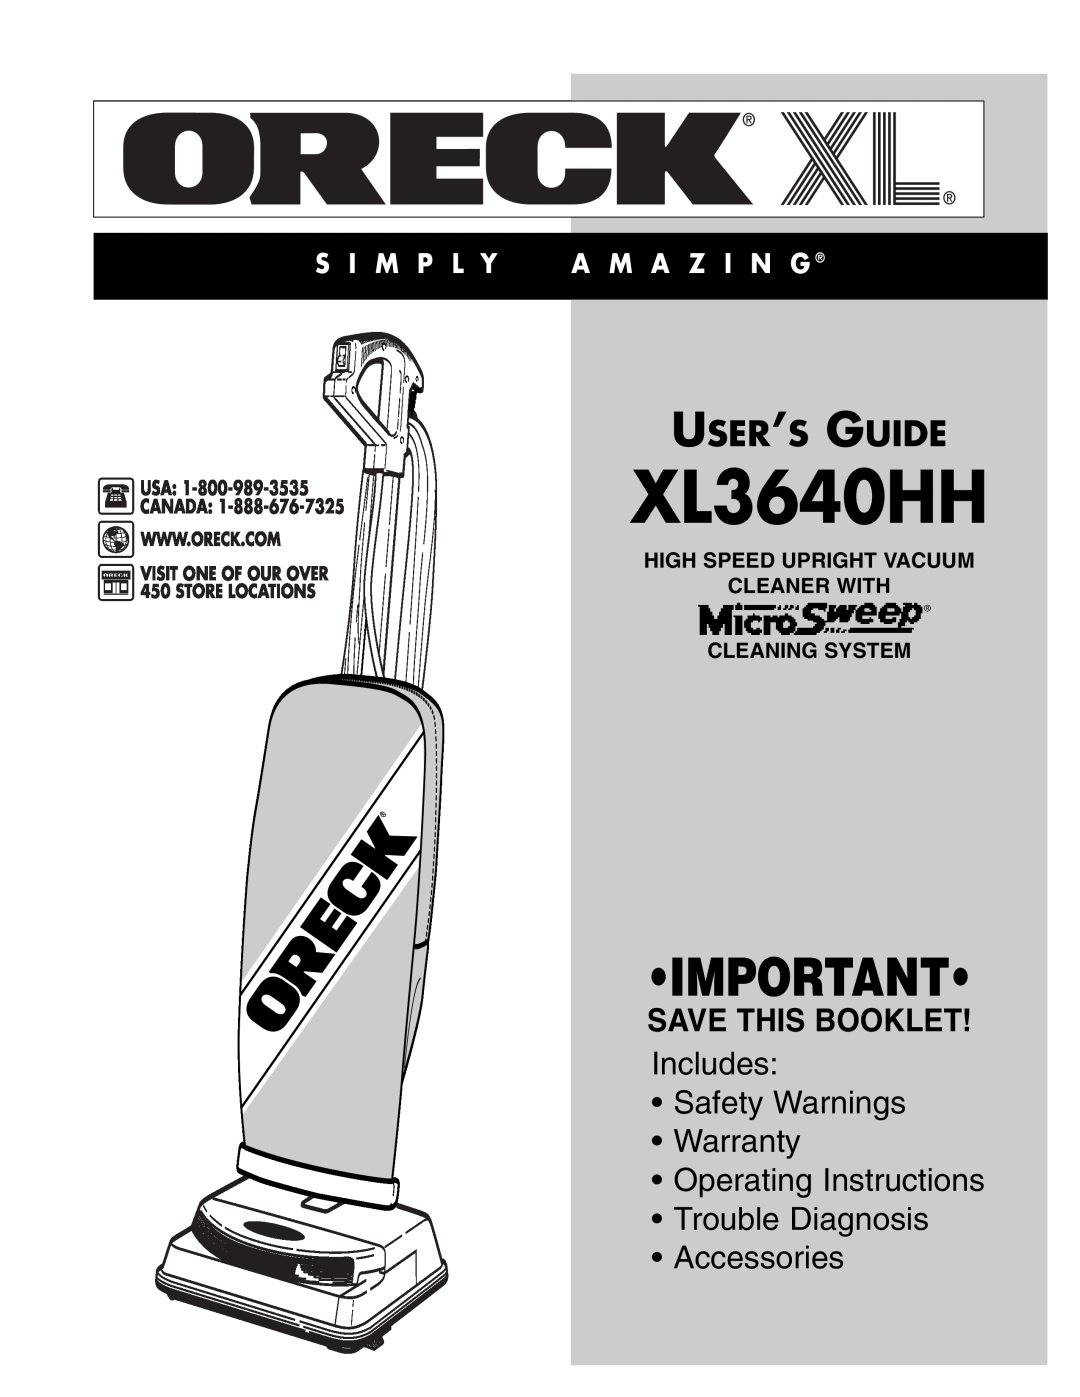 Oreck XL3640HH warranty High Speed Upright Vacuum Cleaner With, Cleaning System, User’S Guide, Save This Booklet 